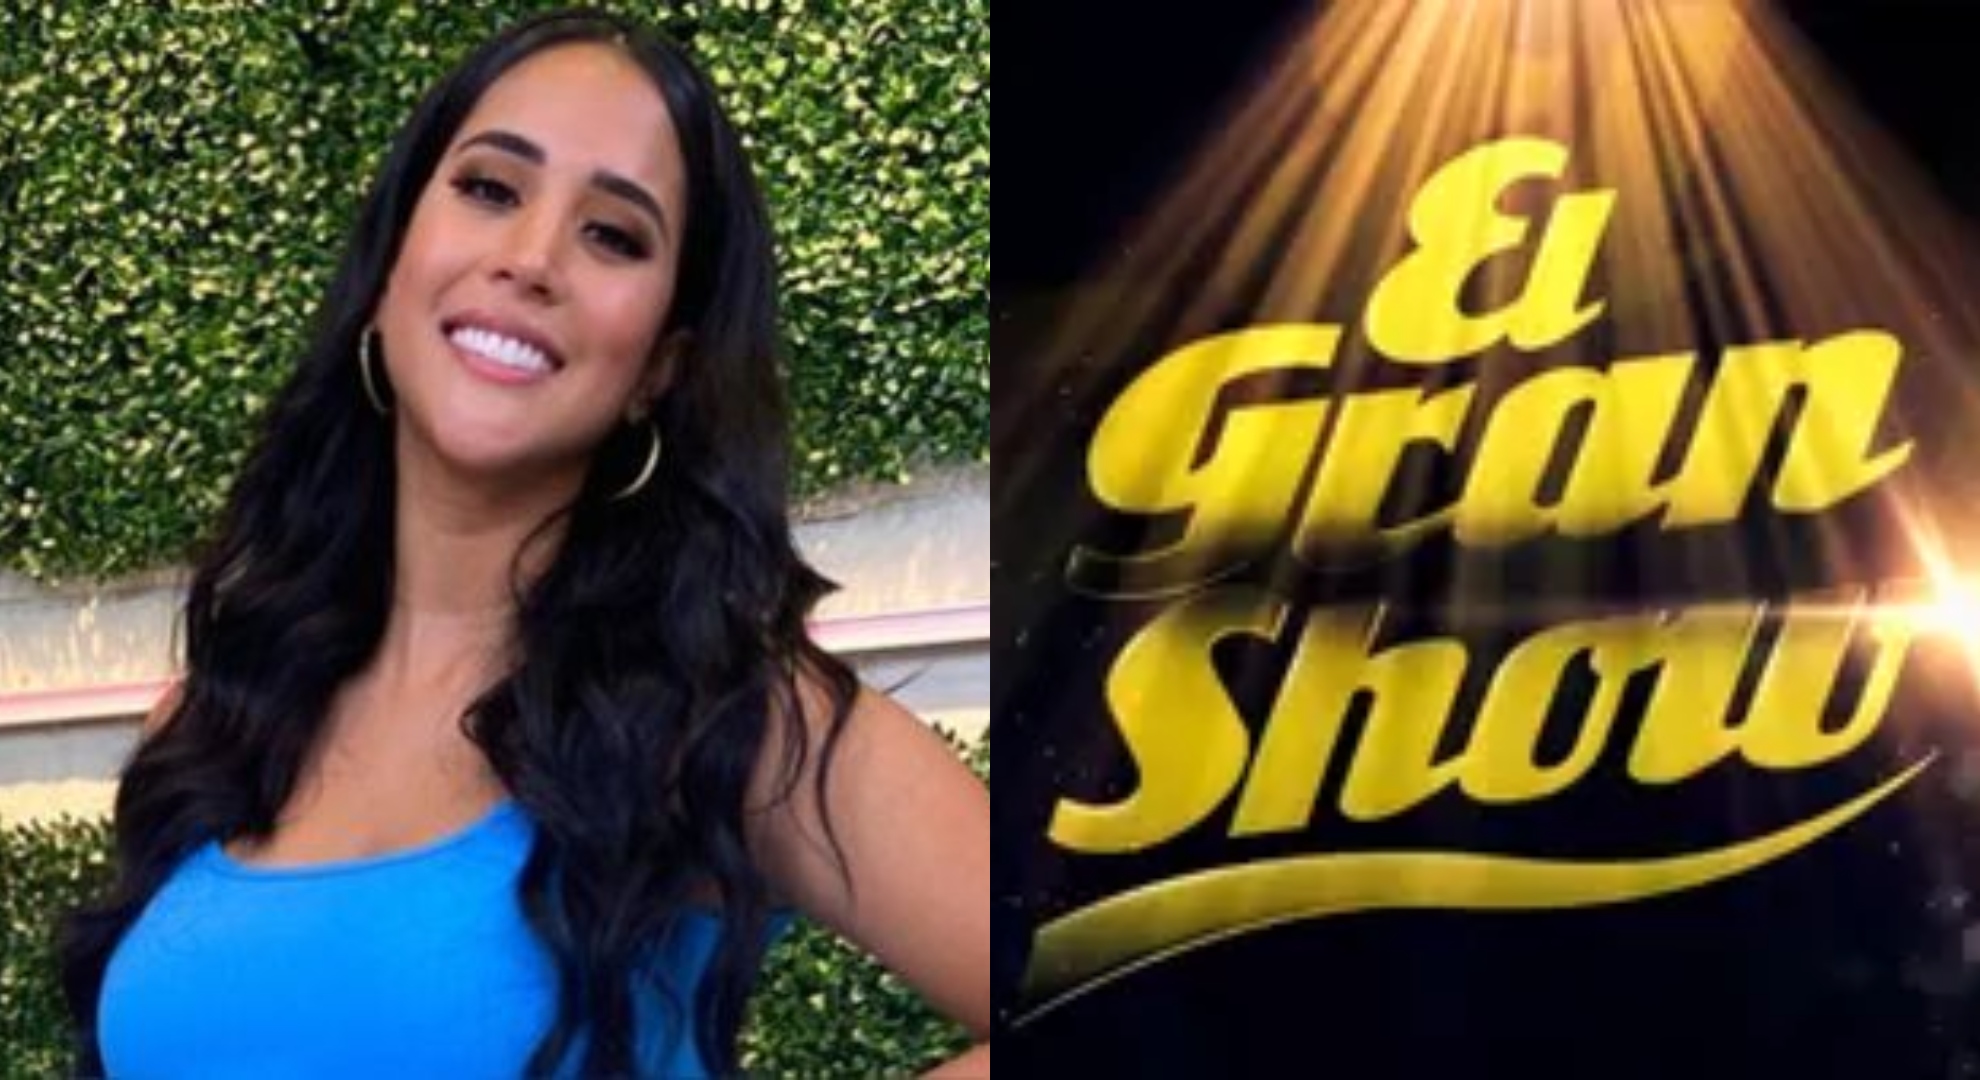 Melissa Paredes has been announced as a contestant on the El Gran Show.